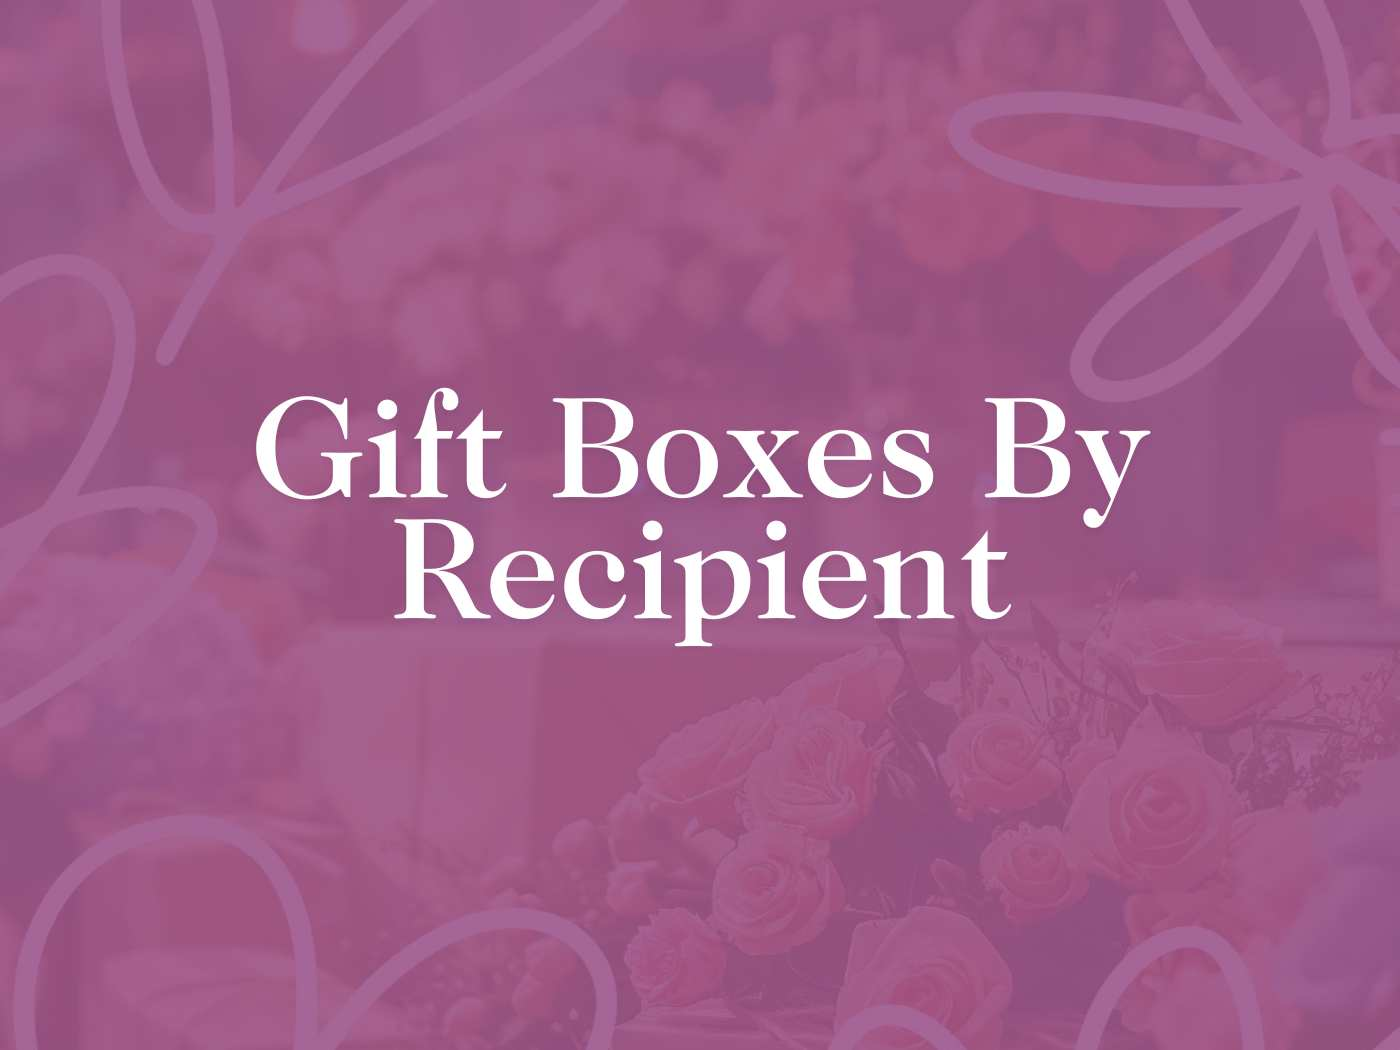 Elegant promotional image for the Gift Boxes by Recipient Collection, featuring a soft pink floral background, tailored to suit various recipients. From Fabulous Flowers and Gifts.